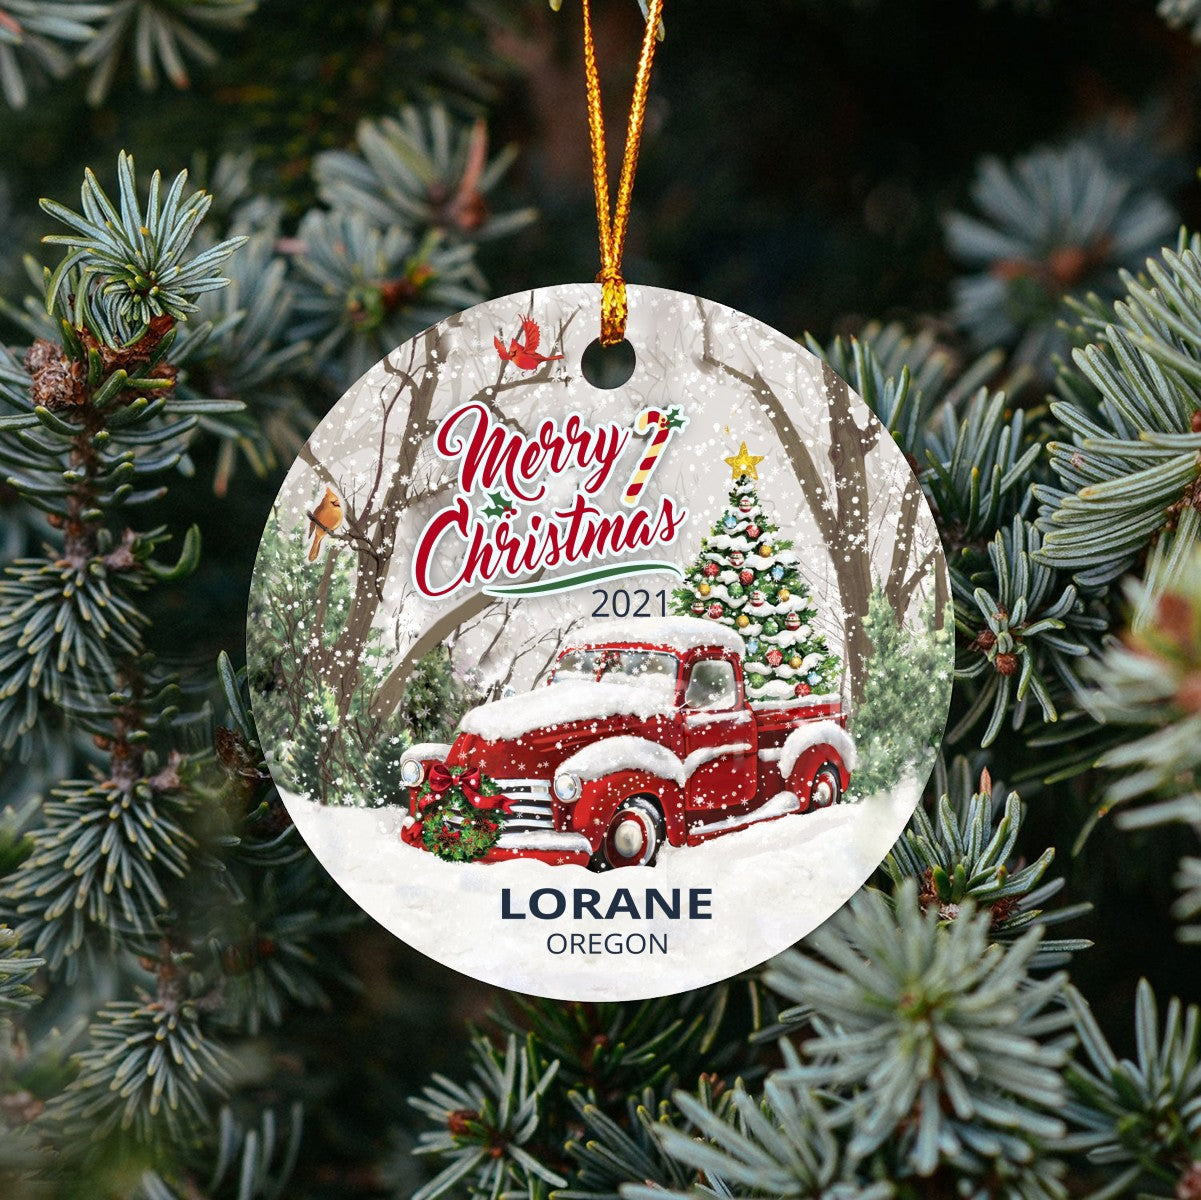 Christmas Tree Ornaments Lorane - Ornament With Name City, State Lorane Oregon OR Ornament - Red Truck Xmas Ornaments 3'' Plastic Gift For Family, Friend And Housewarming